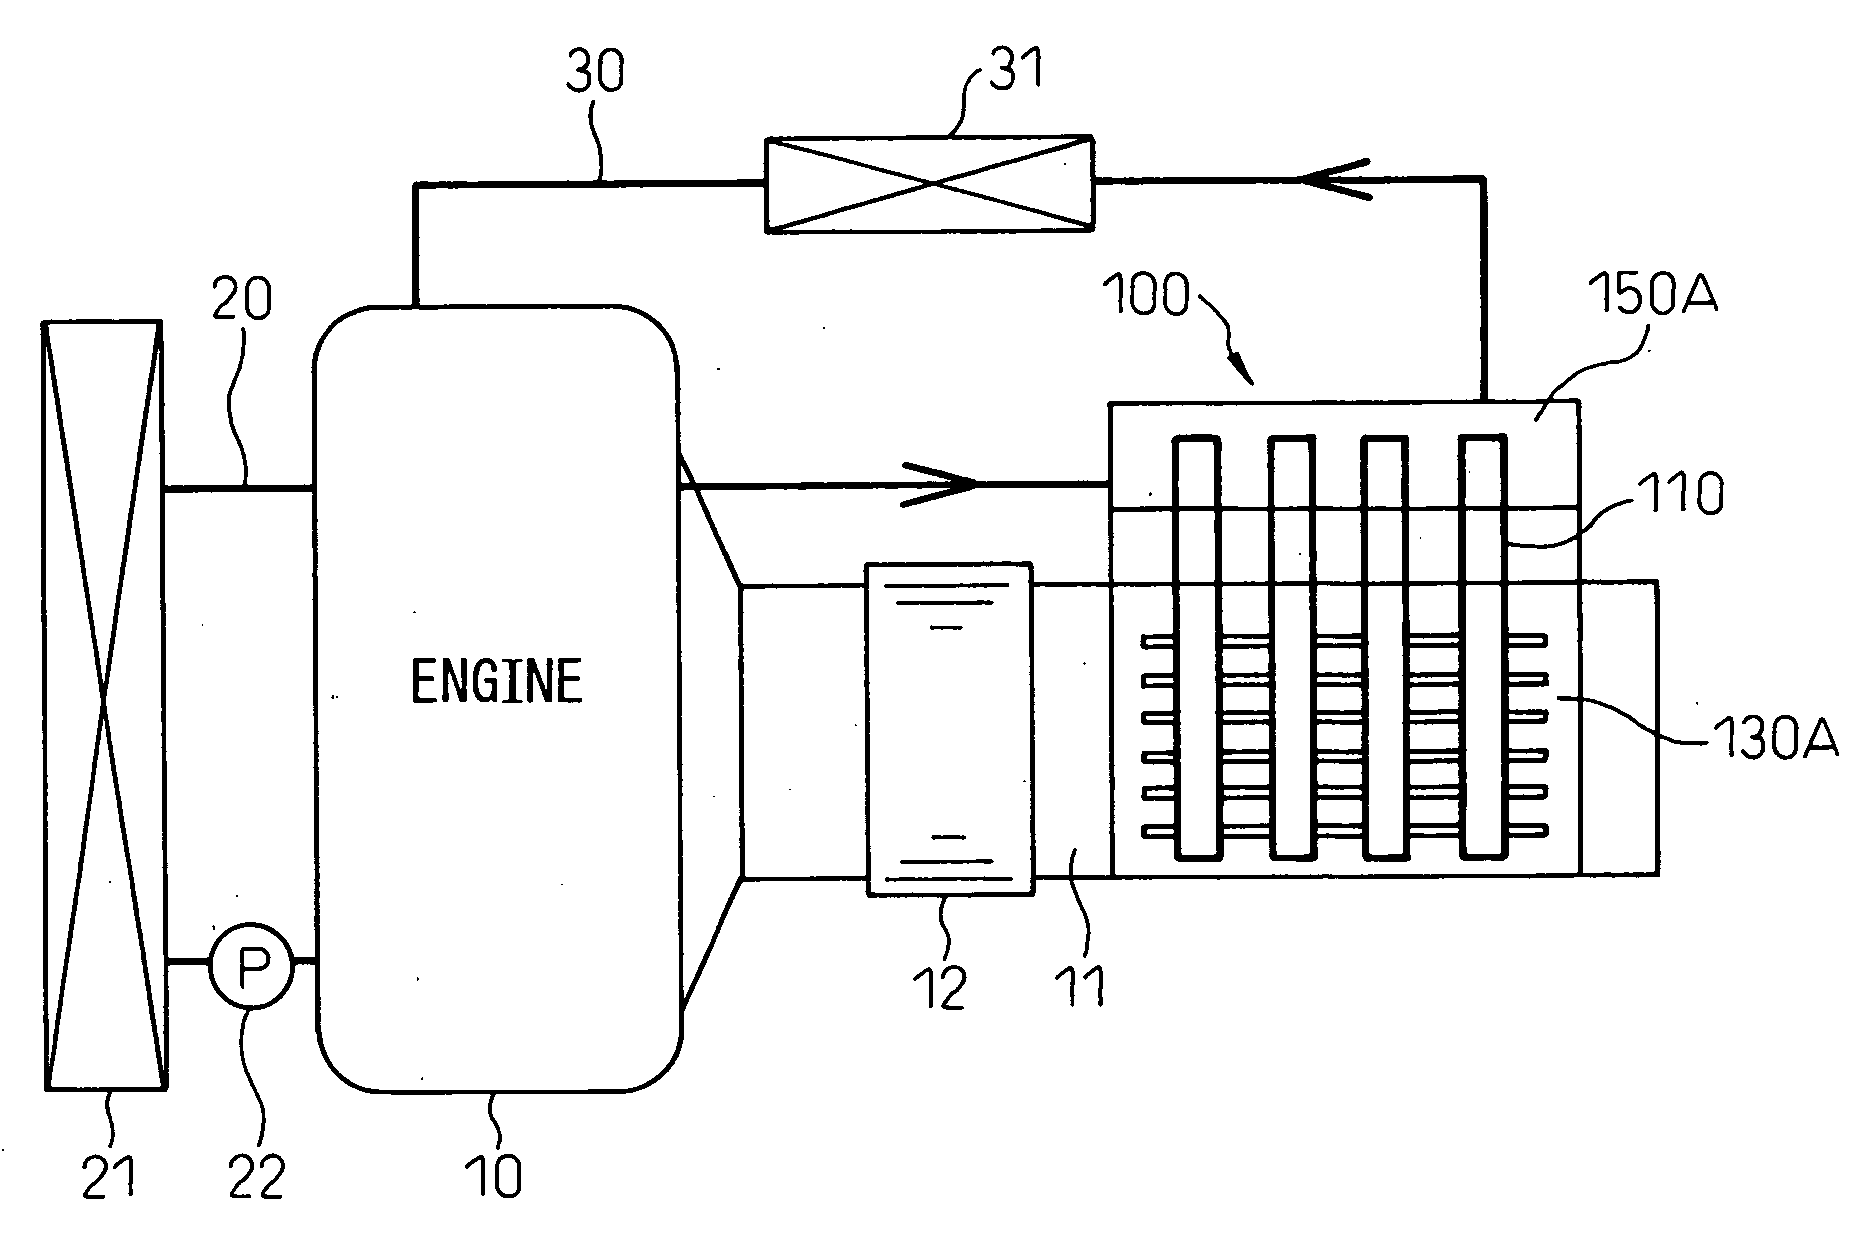 Exhaust heat recovering device